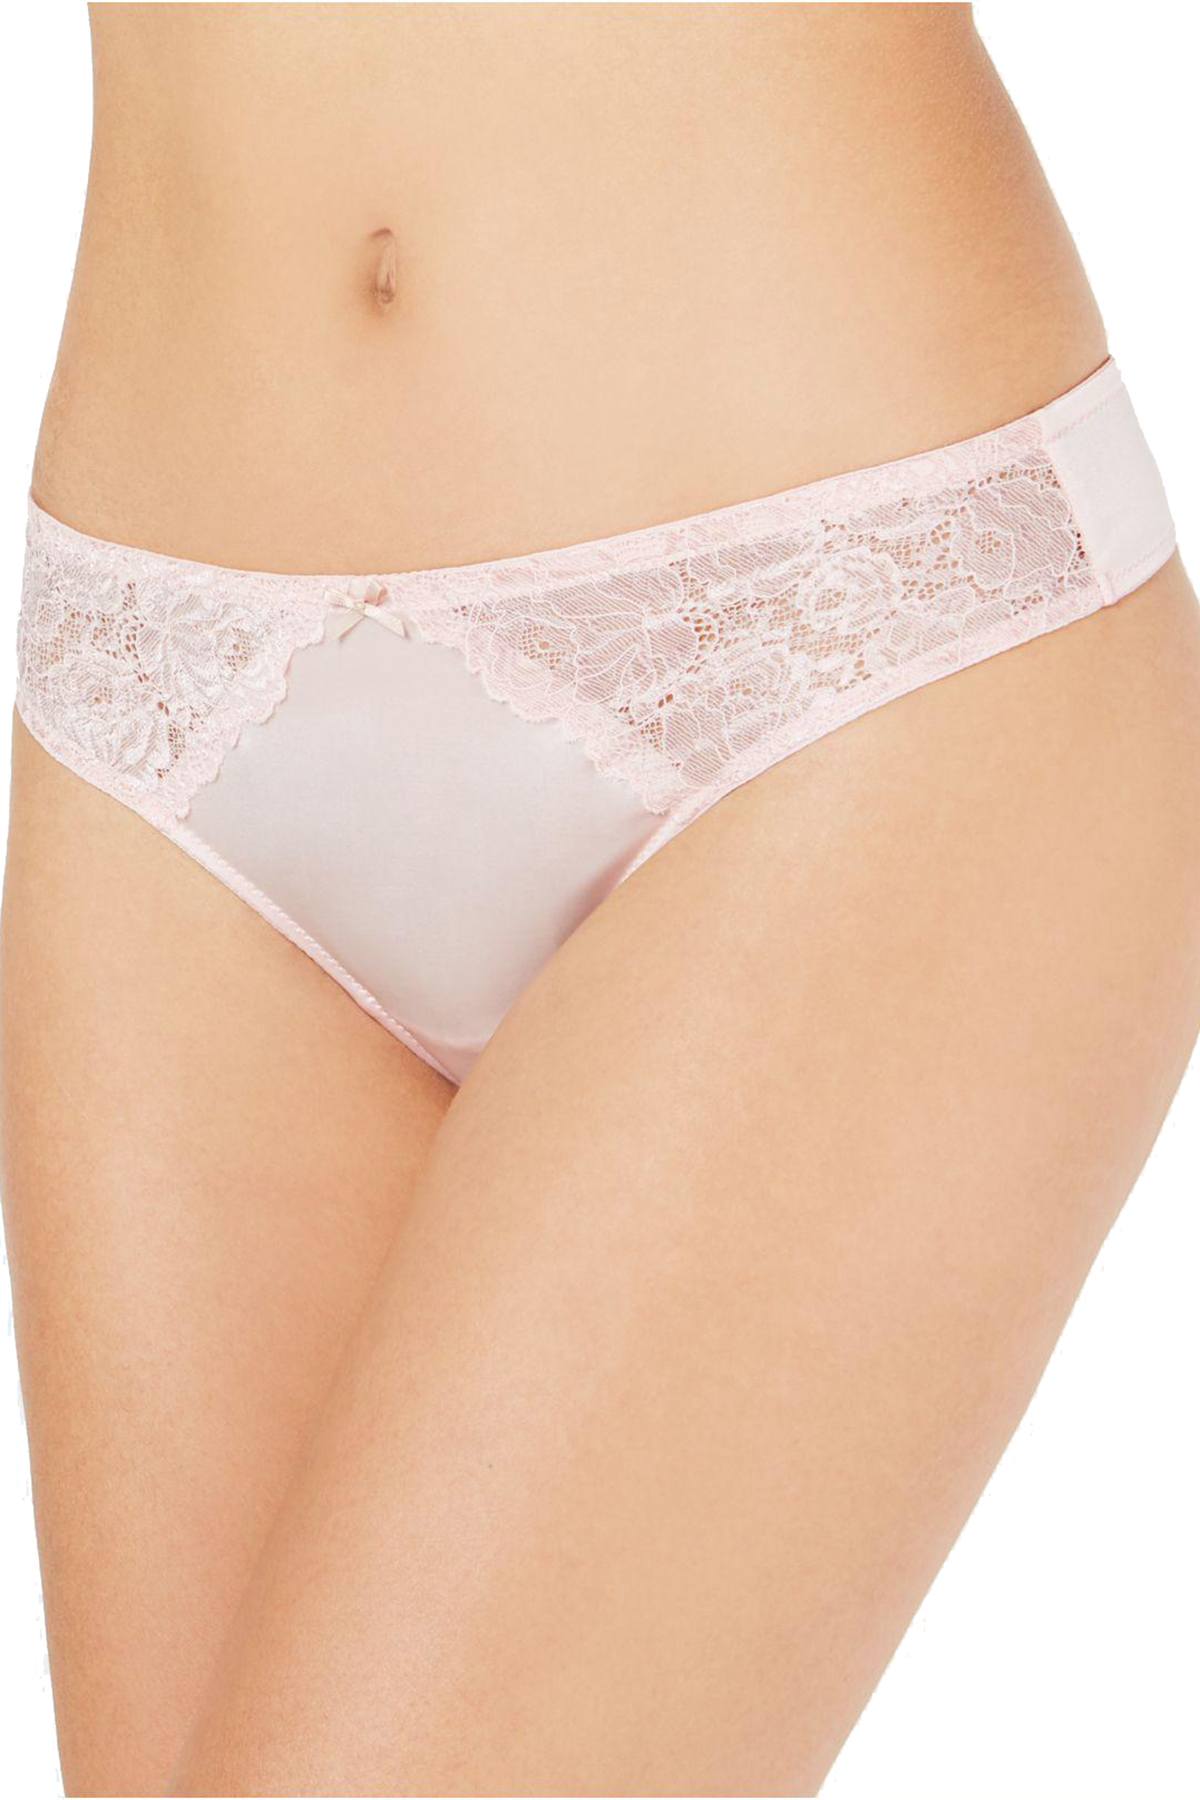 INC International Concepts Smooth Lace Thong in Lotus Pink